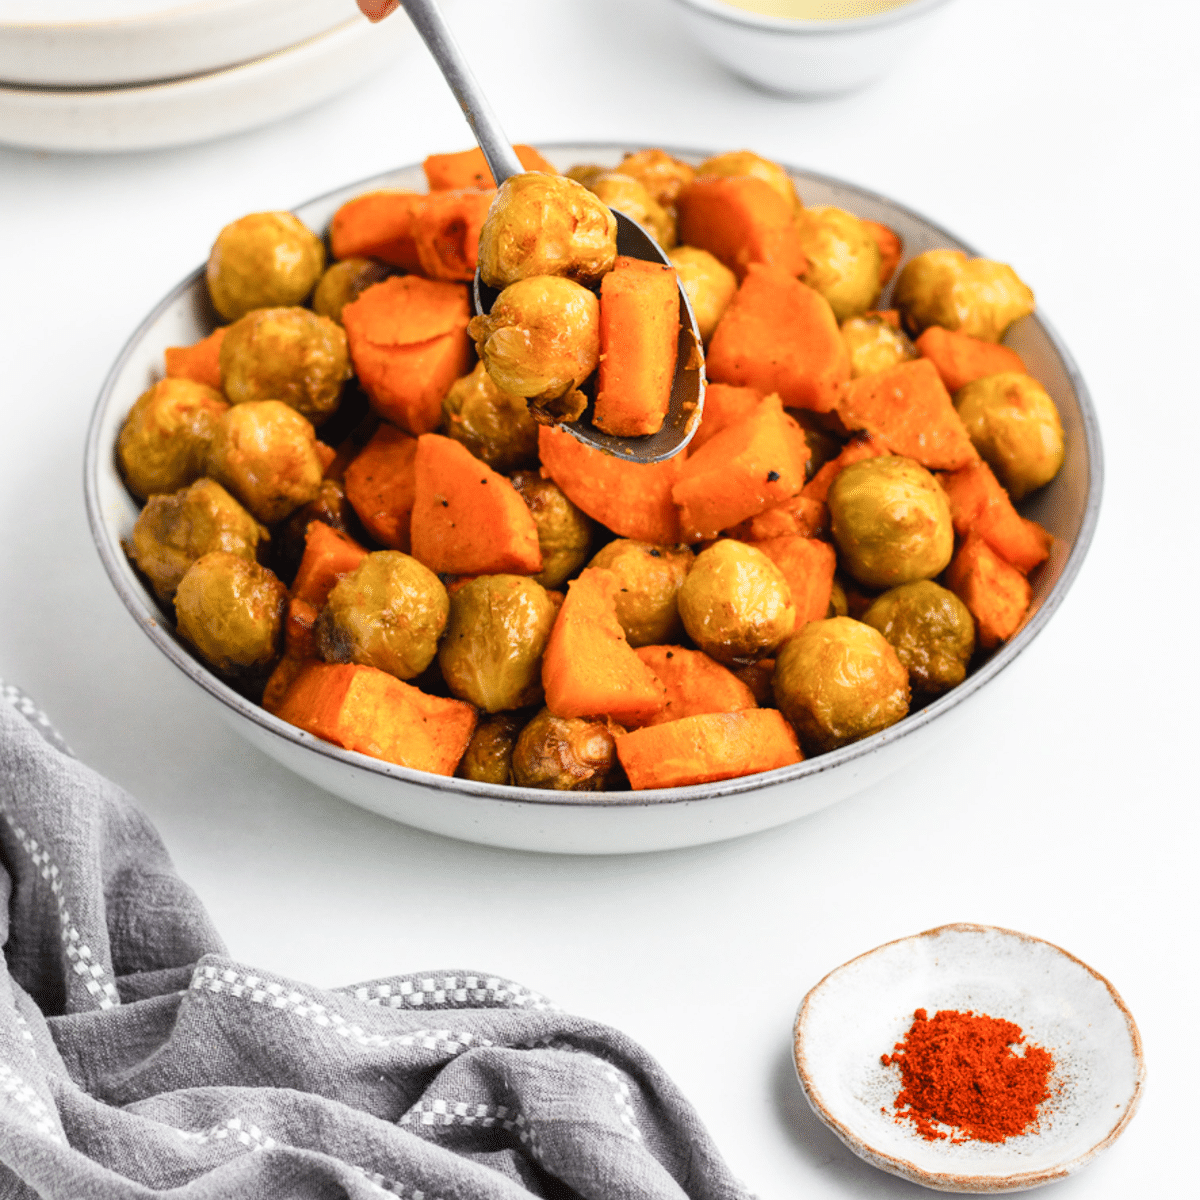 a bowl of roasted sweet potatoes and brussel sprouts with a serving spoon in it.